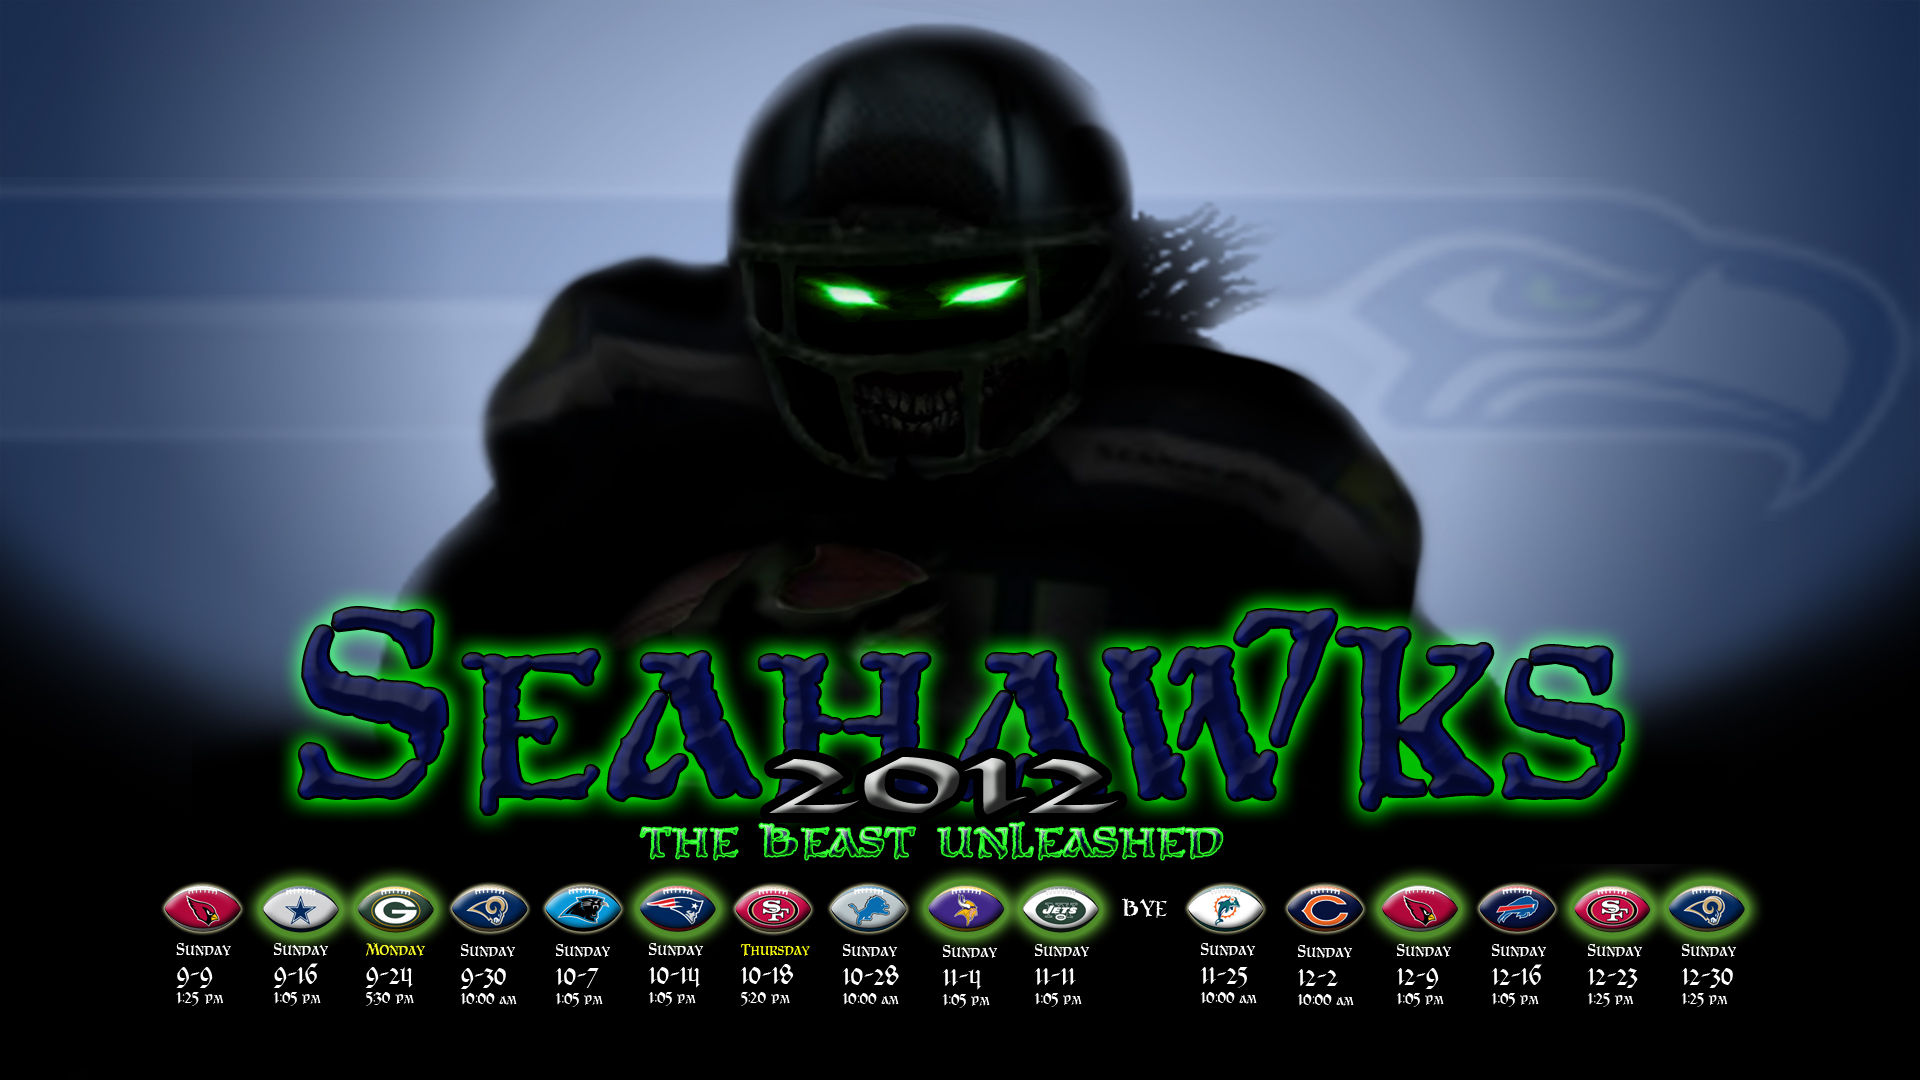 Seattle Seahawks 2014 Schedule Seahawks Home and Away ESPN